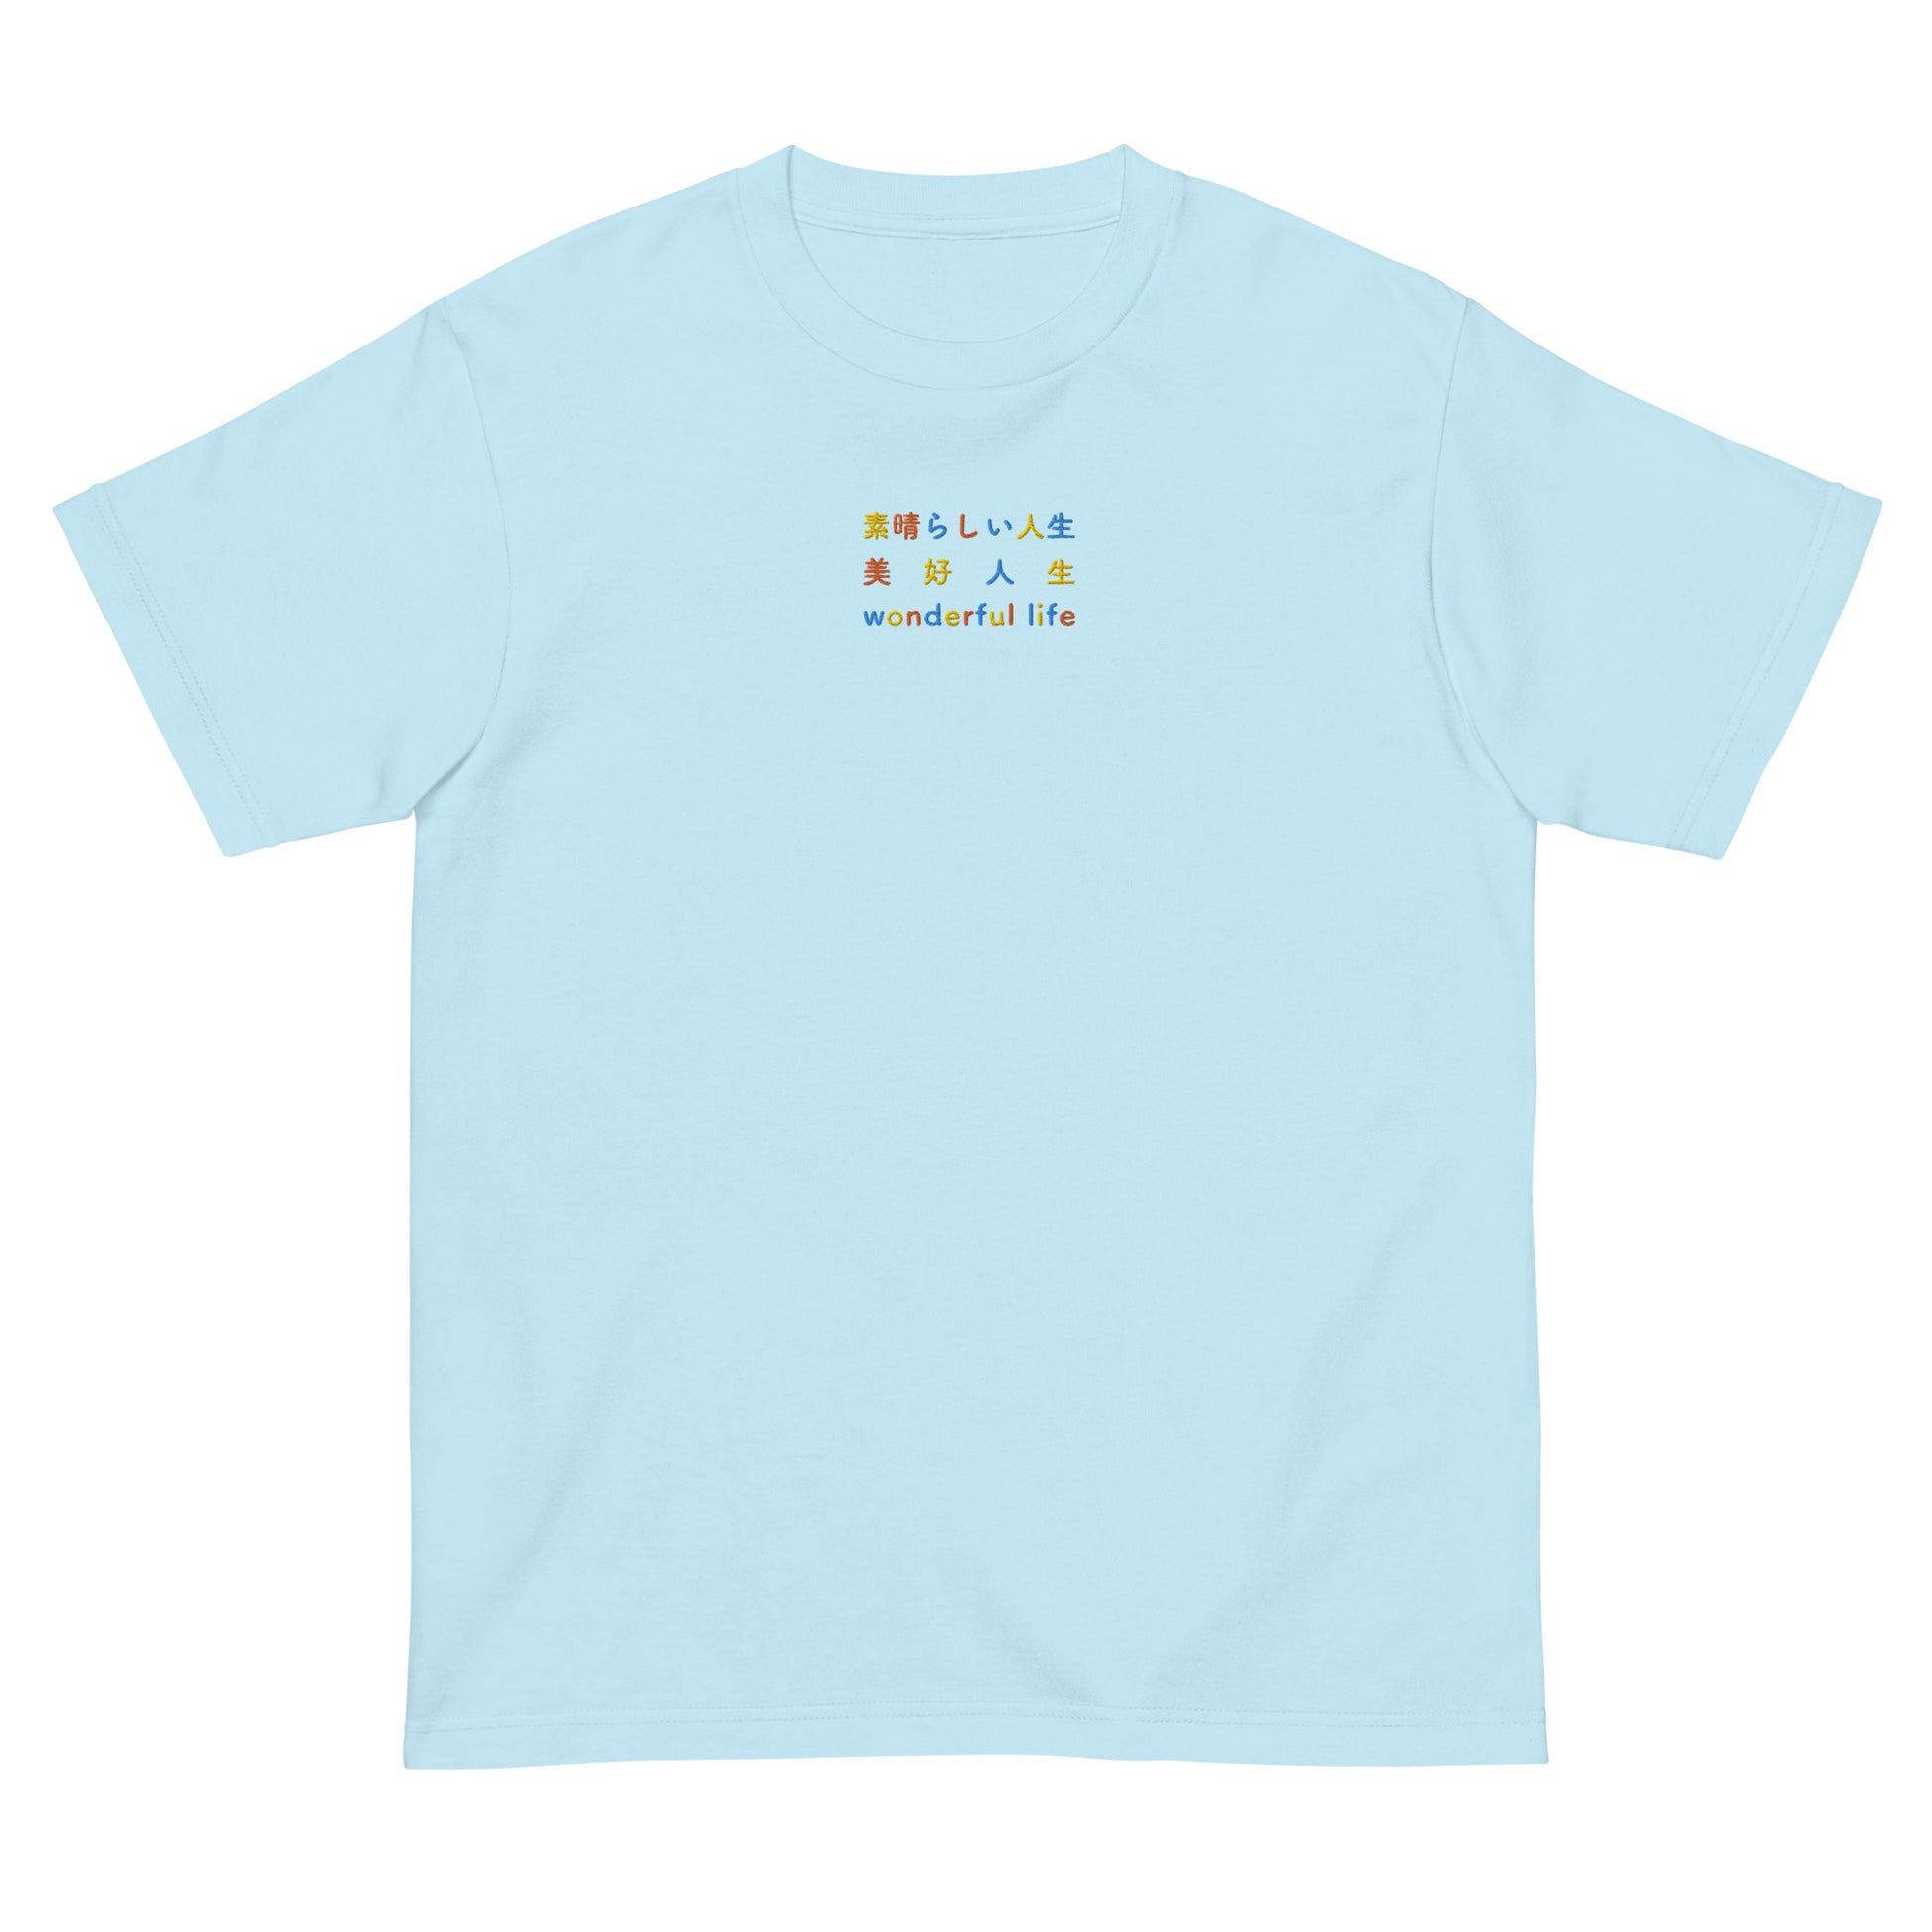 Light Blue High Quality Tee - Front Design with Yellow, Orange and Blue Embroidery "Wonderful Life" in Japanese,Chinese and English